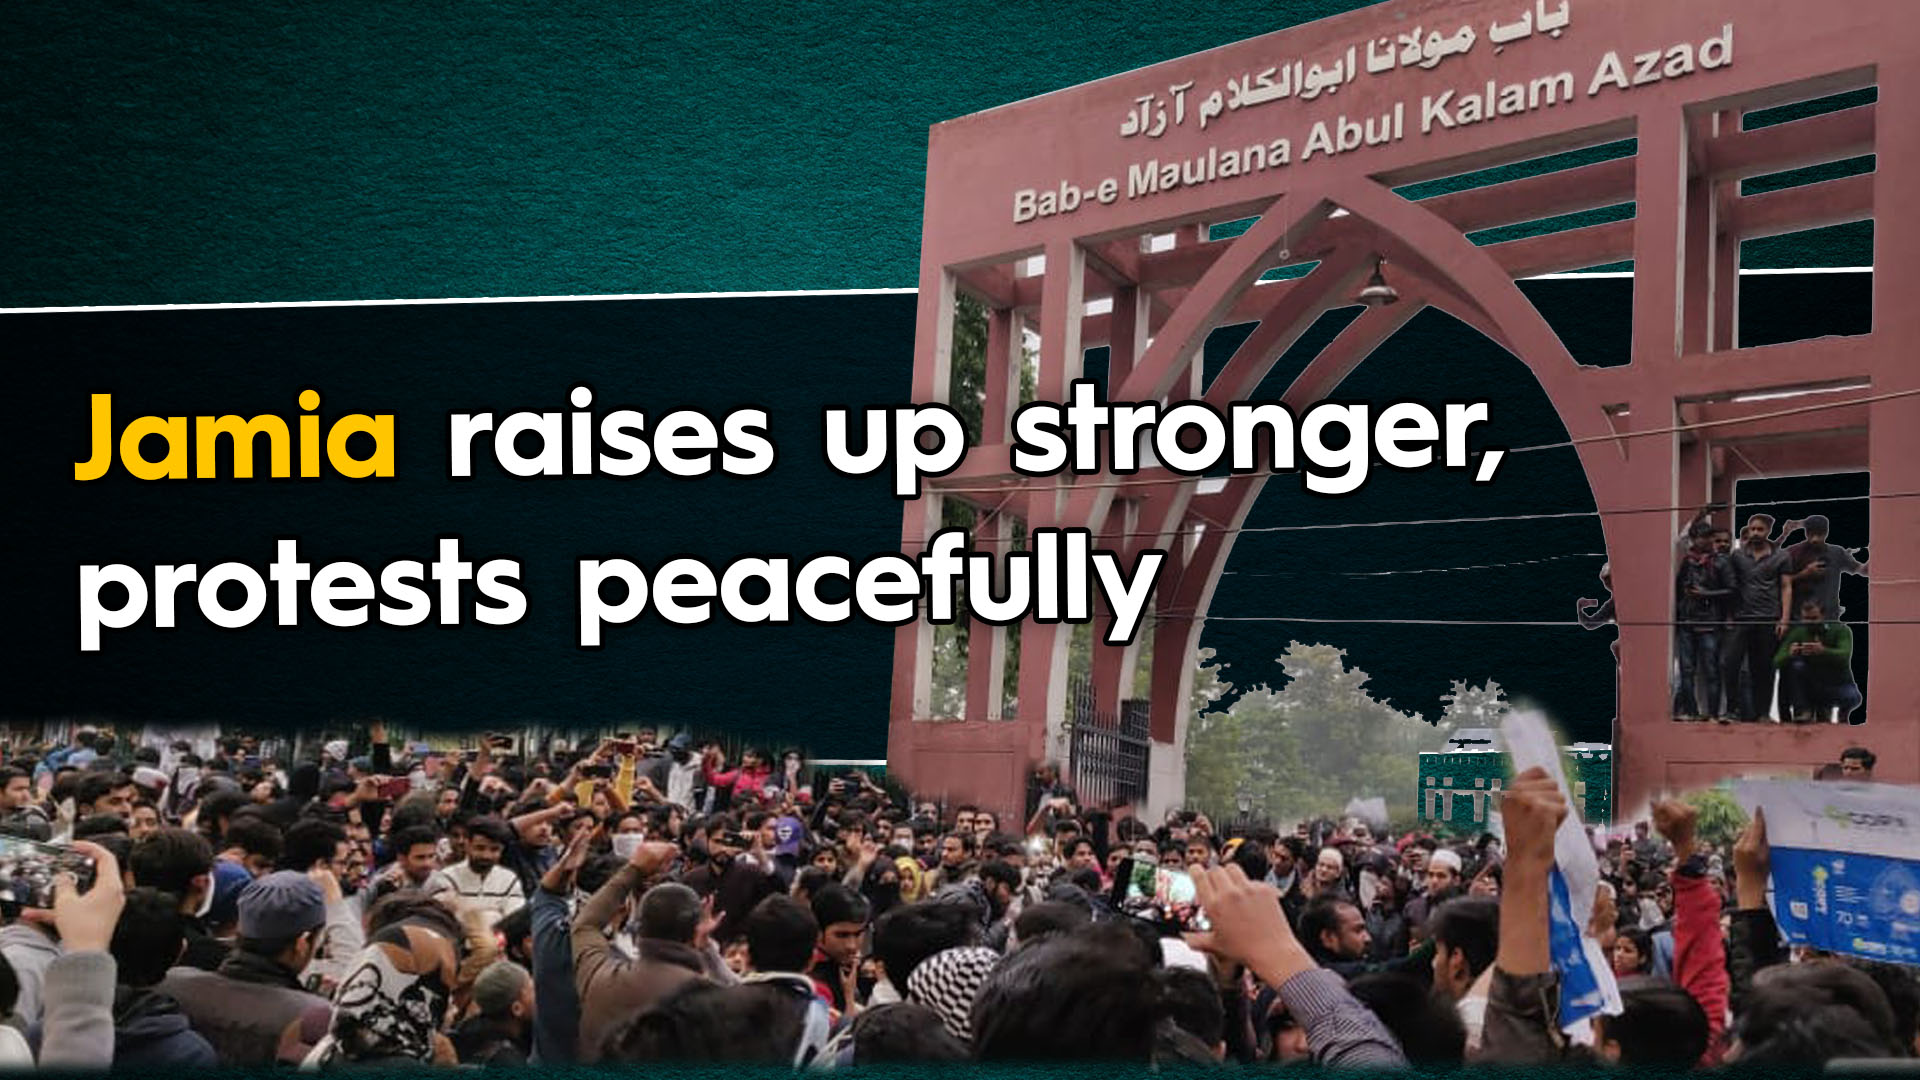 Jamia raises up stronger, protests peacefully